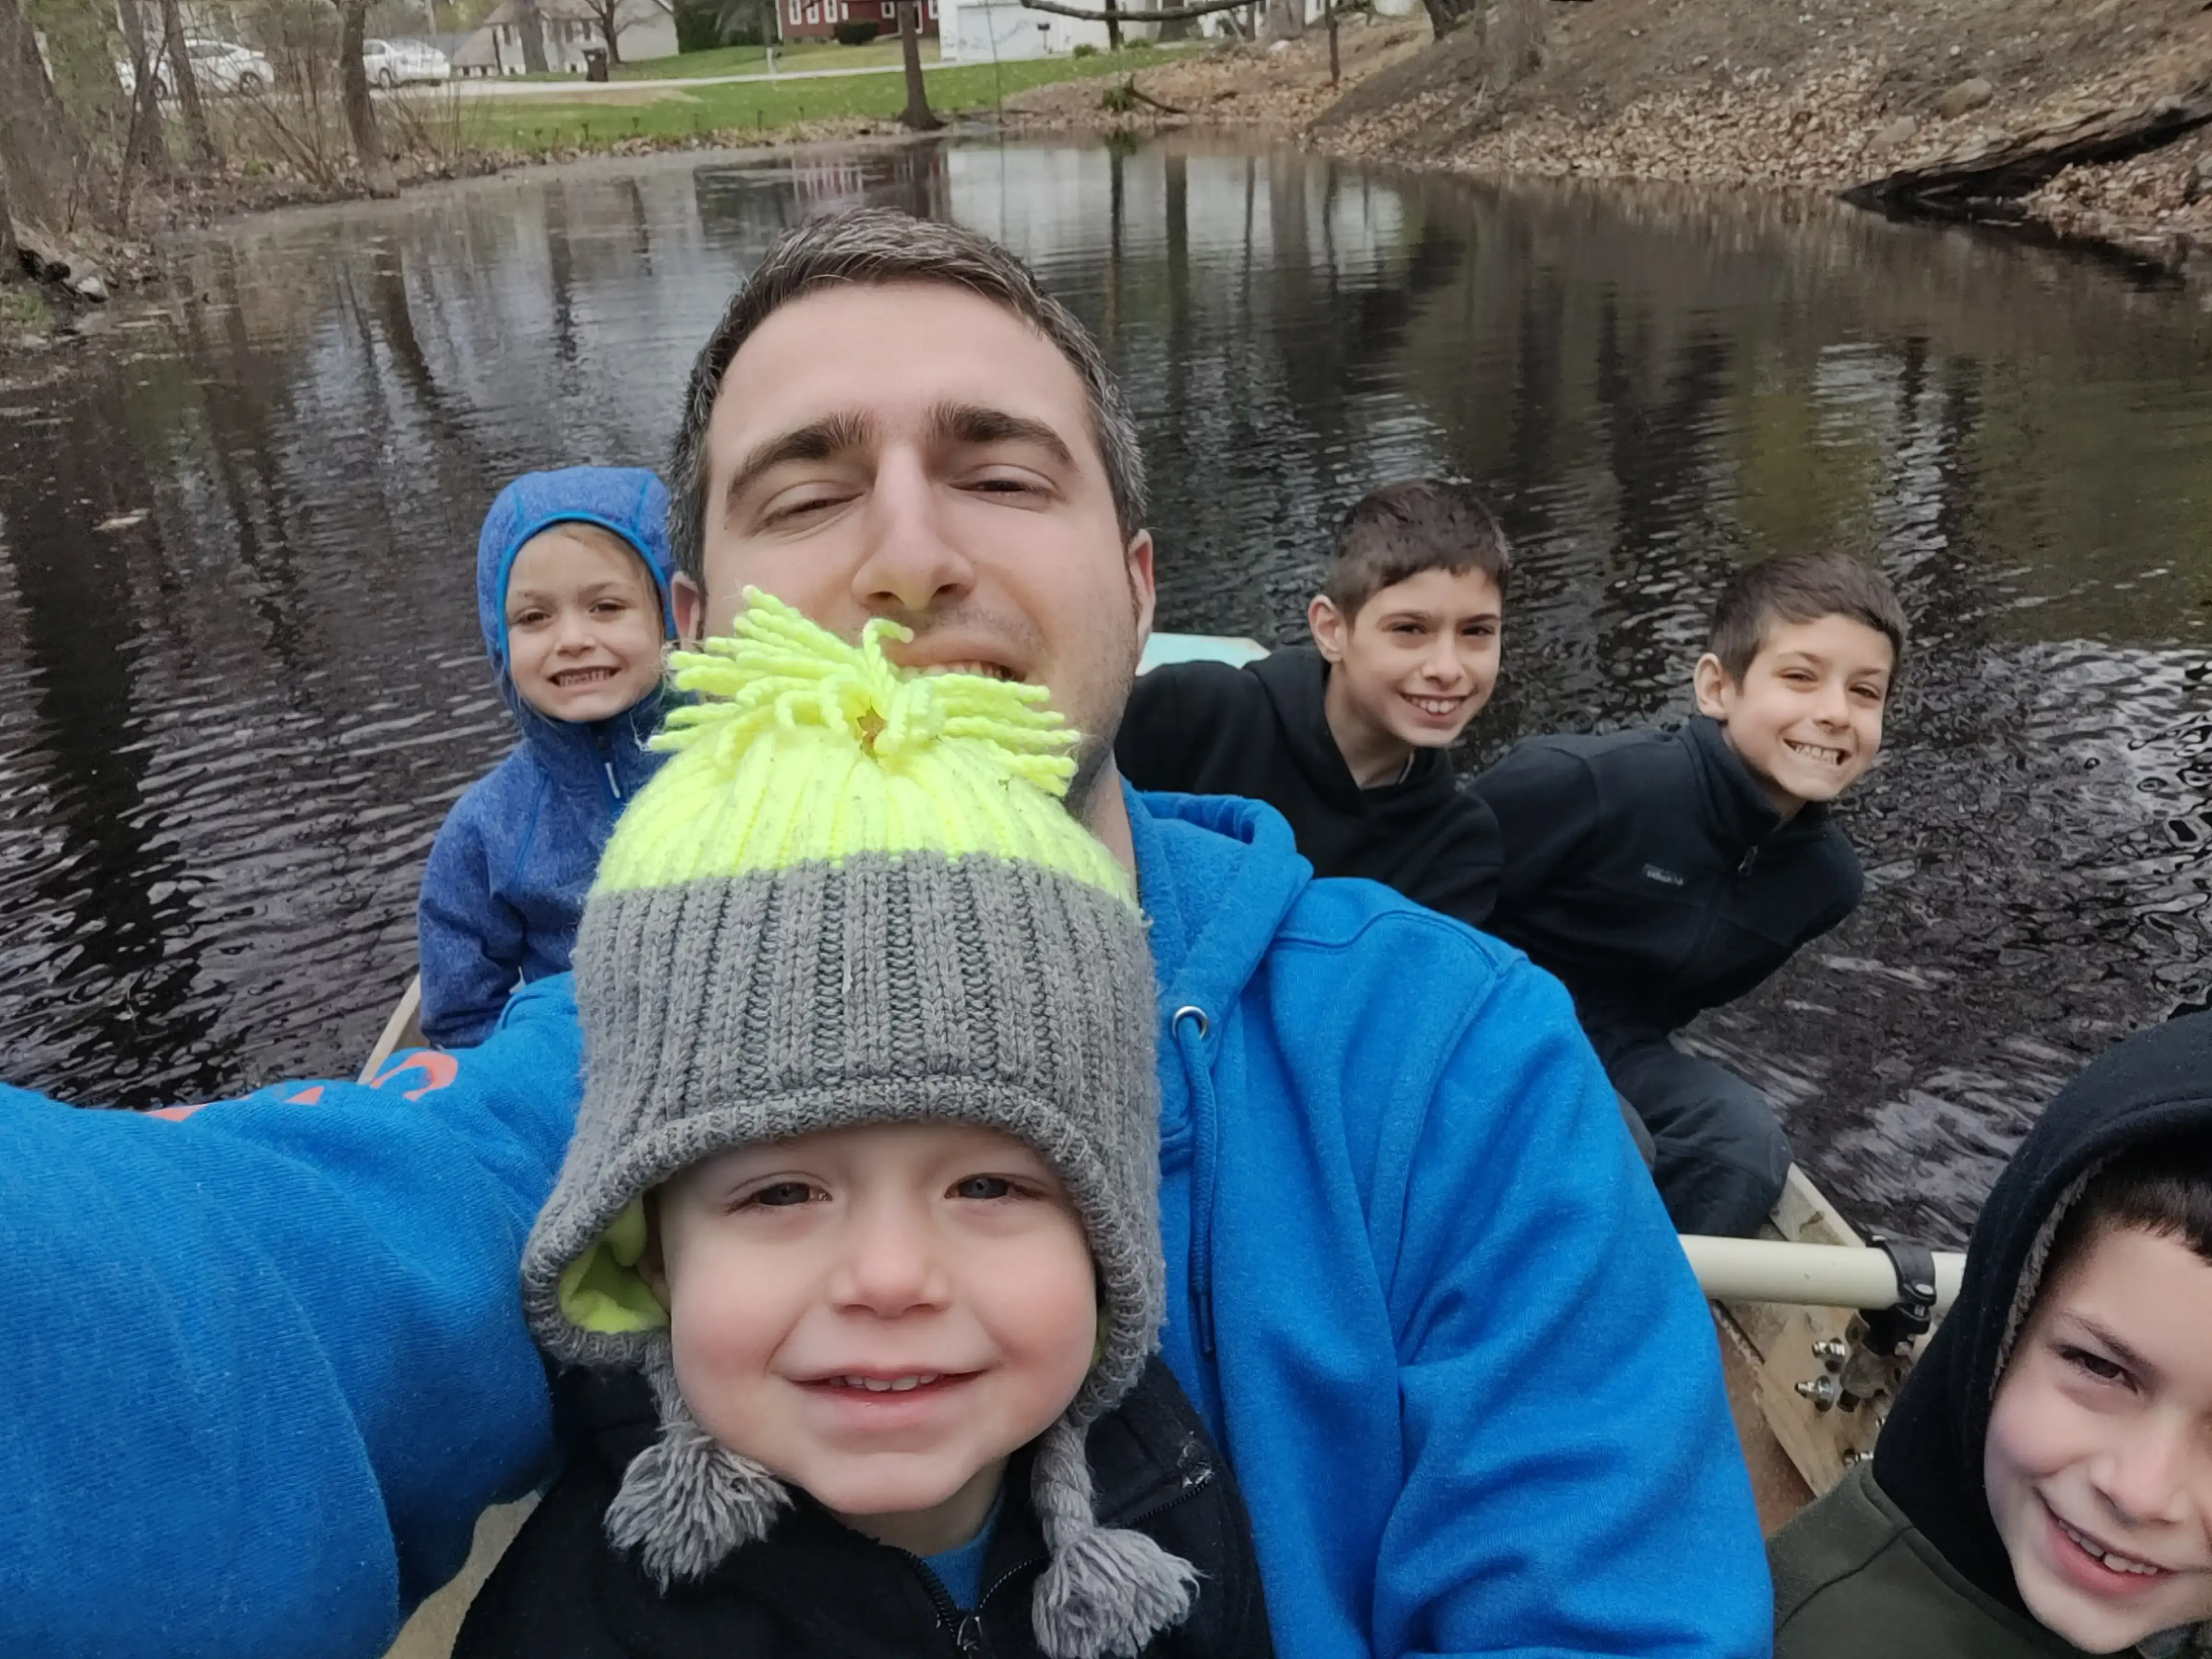 My brother, cousins and I on a boat in a pond.